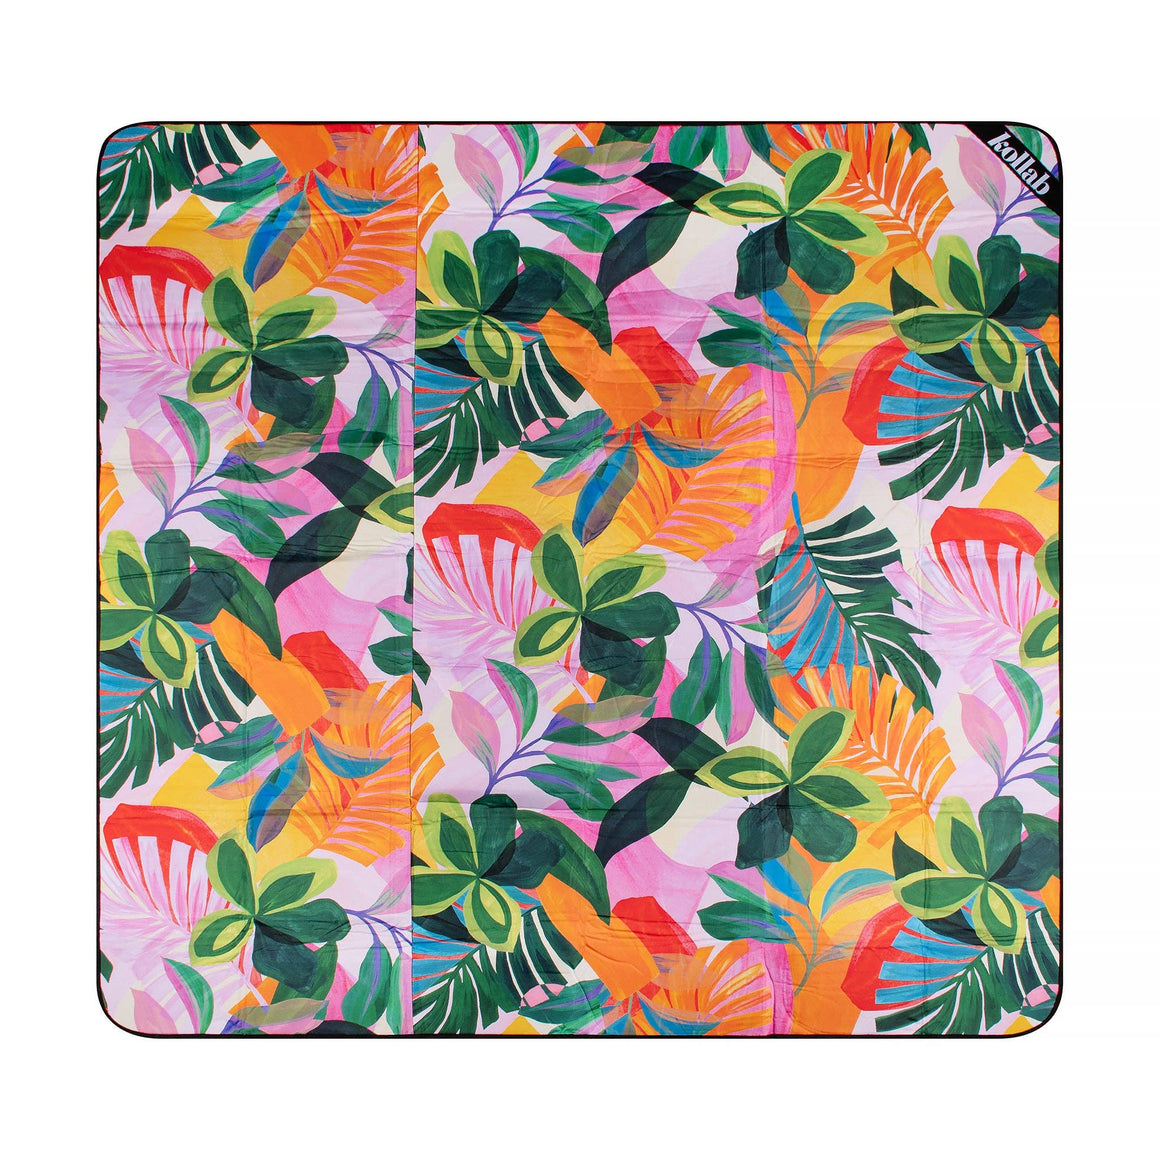 Summertime picnic mat by Kollab. Just like a leisurely walk through the rainforest, this lively design features bold, tropical foliage in an array of striking colours. This print captures the essence of summertime with its bright and playful aesthetic, ready for days on the warm sand.  – Style Notes